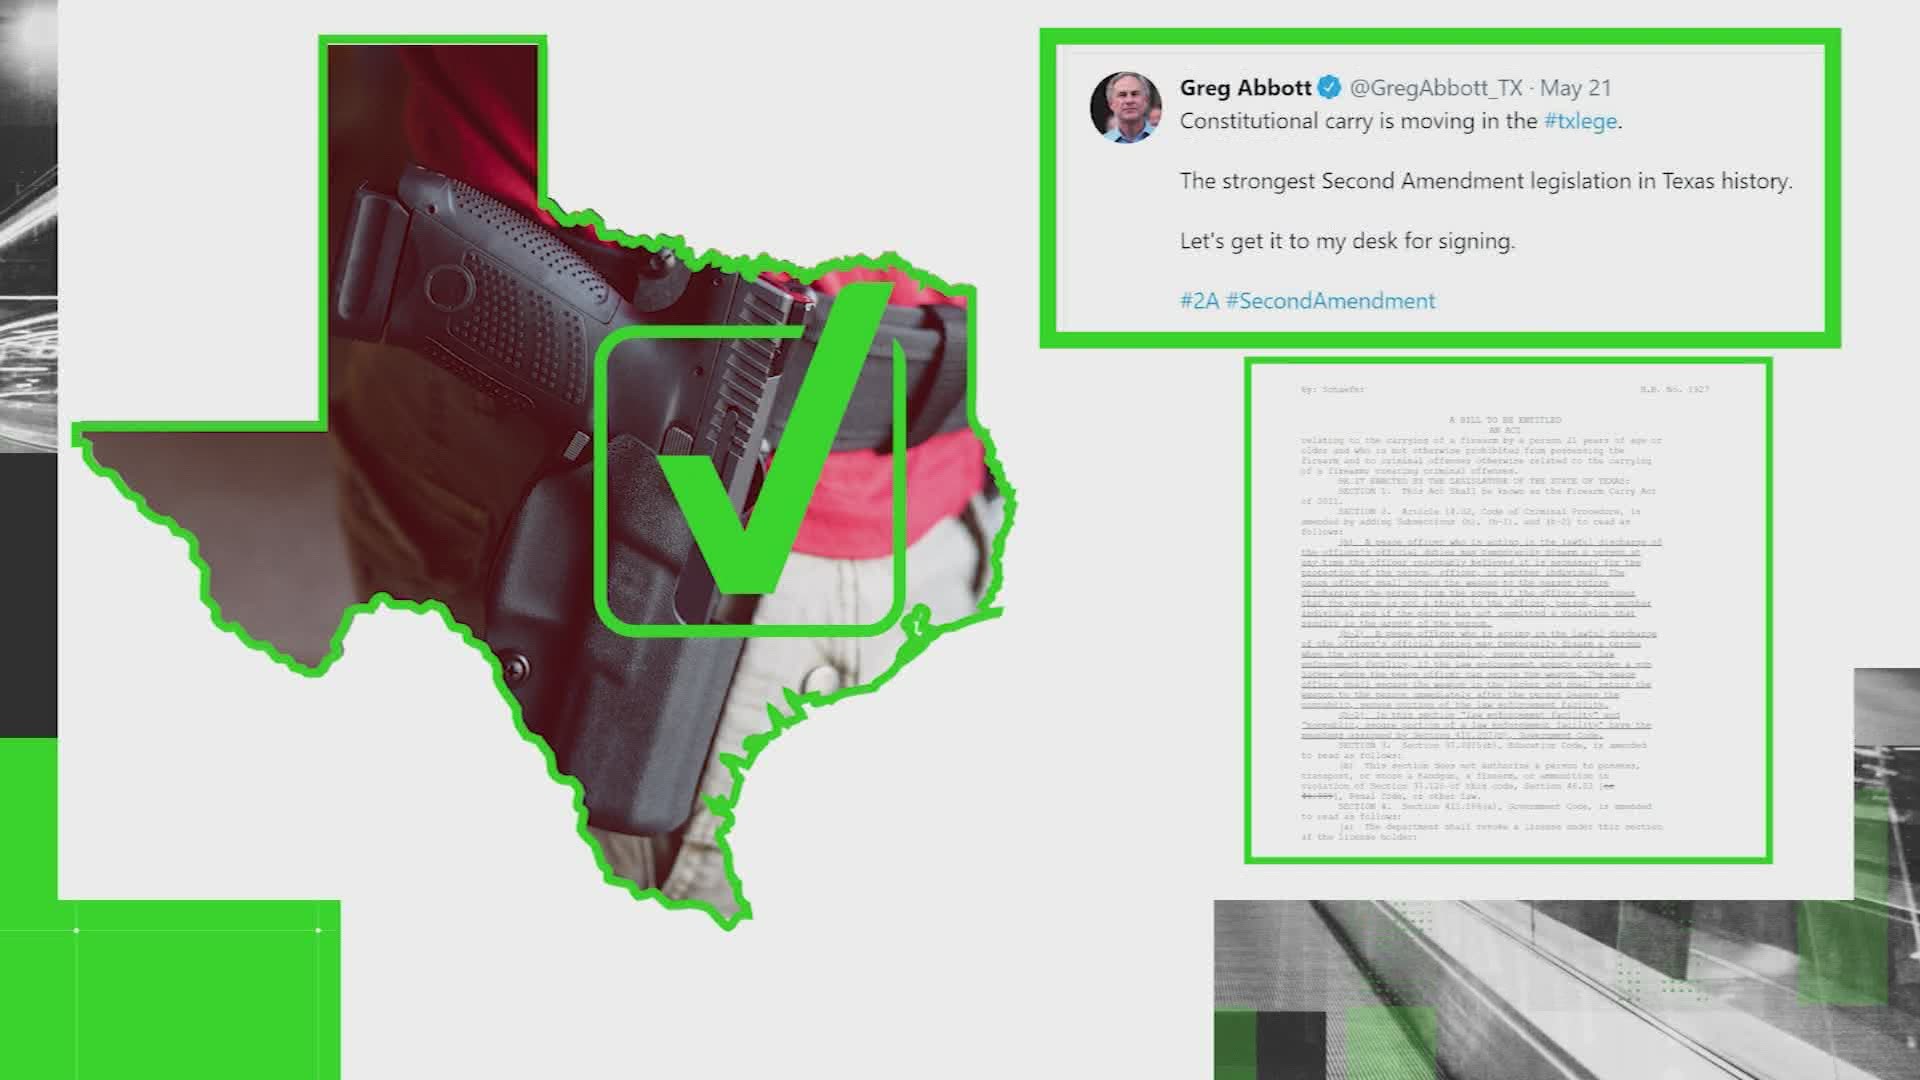 The bill moved favorably through the Texas legislature. Abbott refers to it as, “The strongest second amendment legislation in Texas history.”